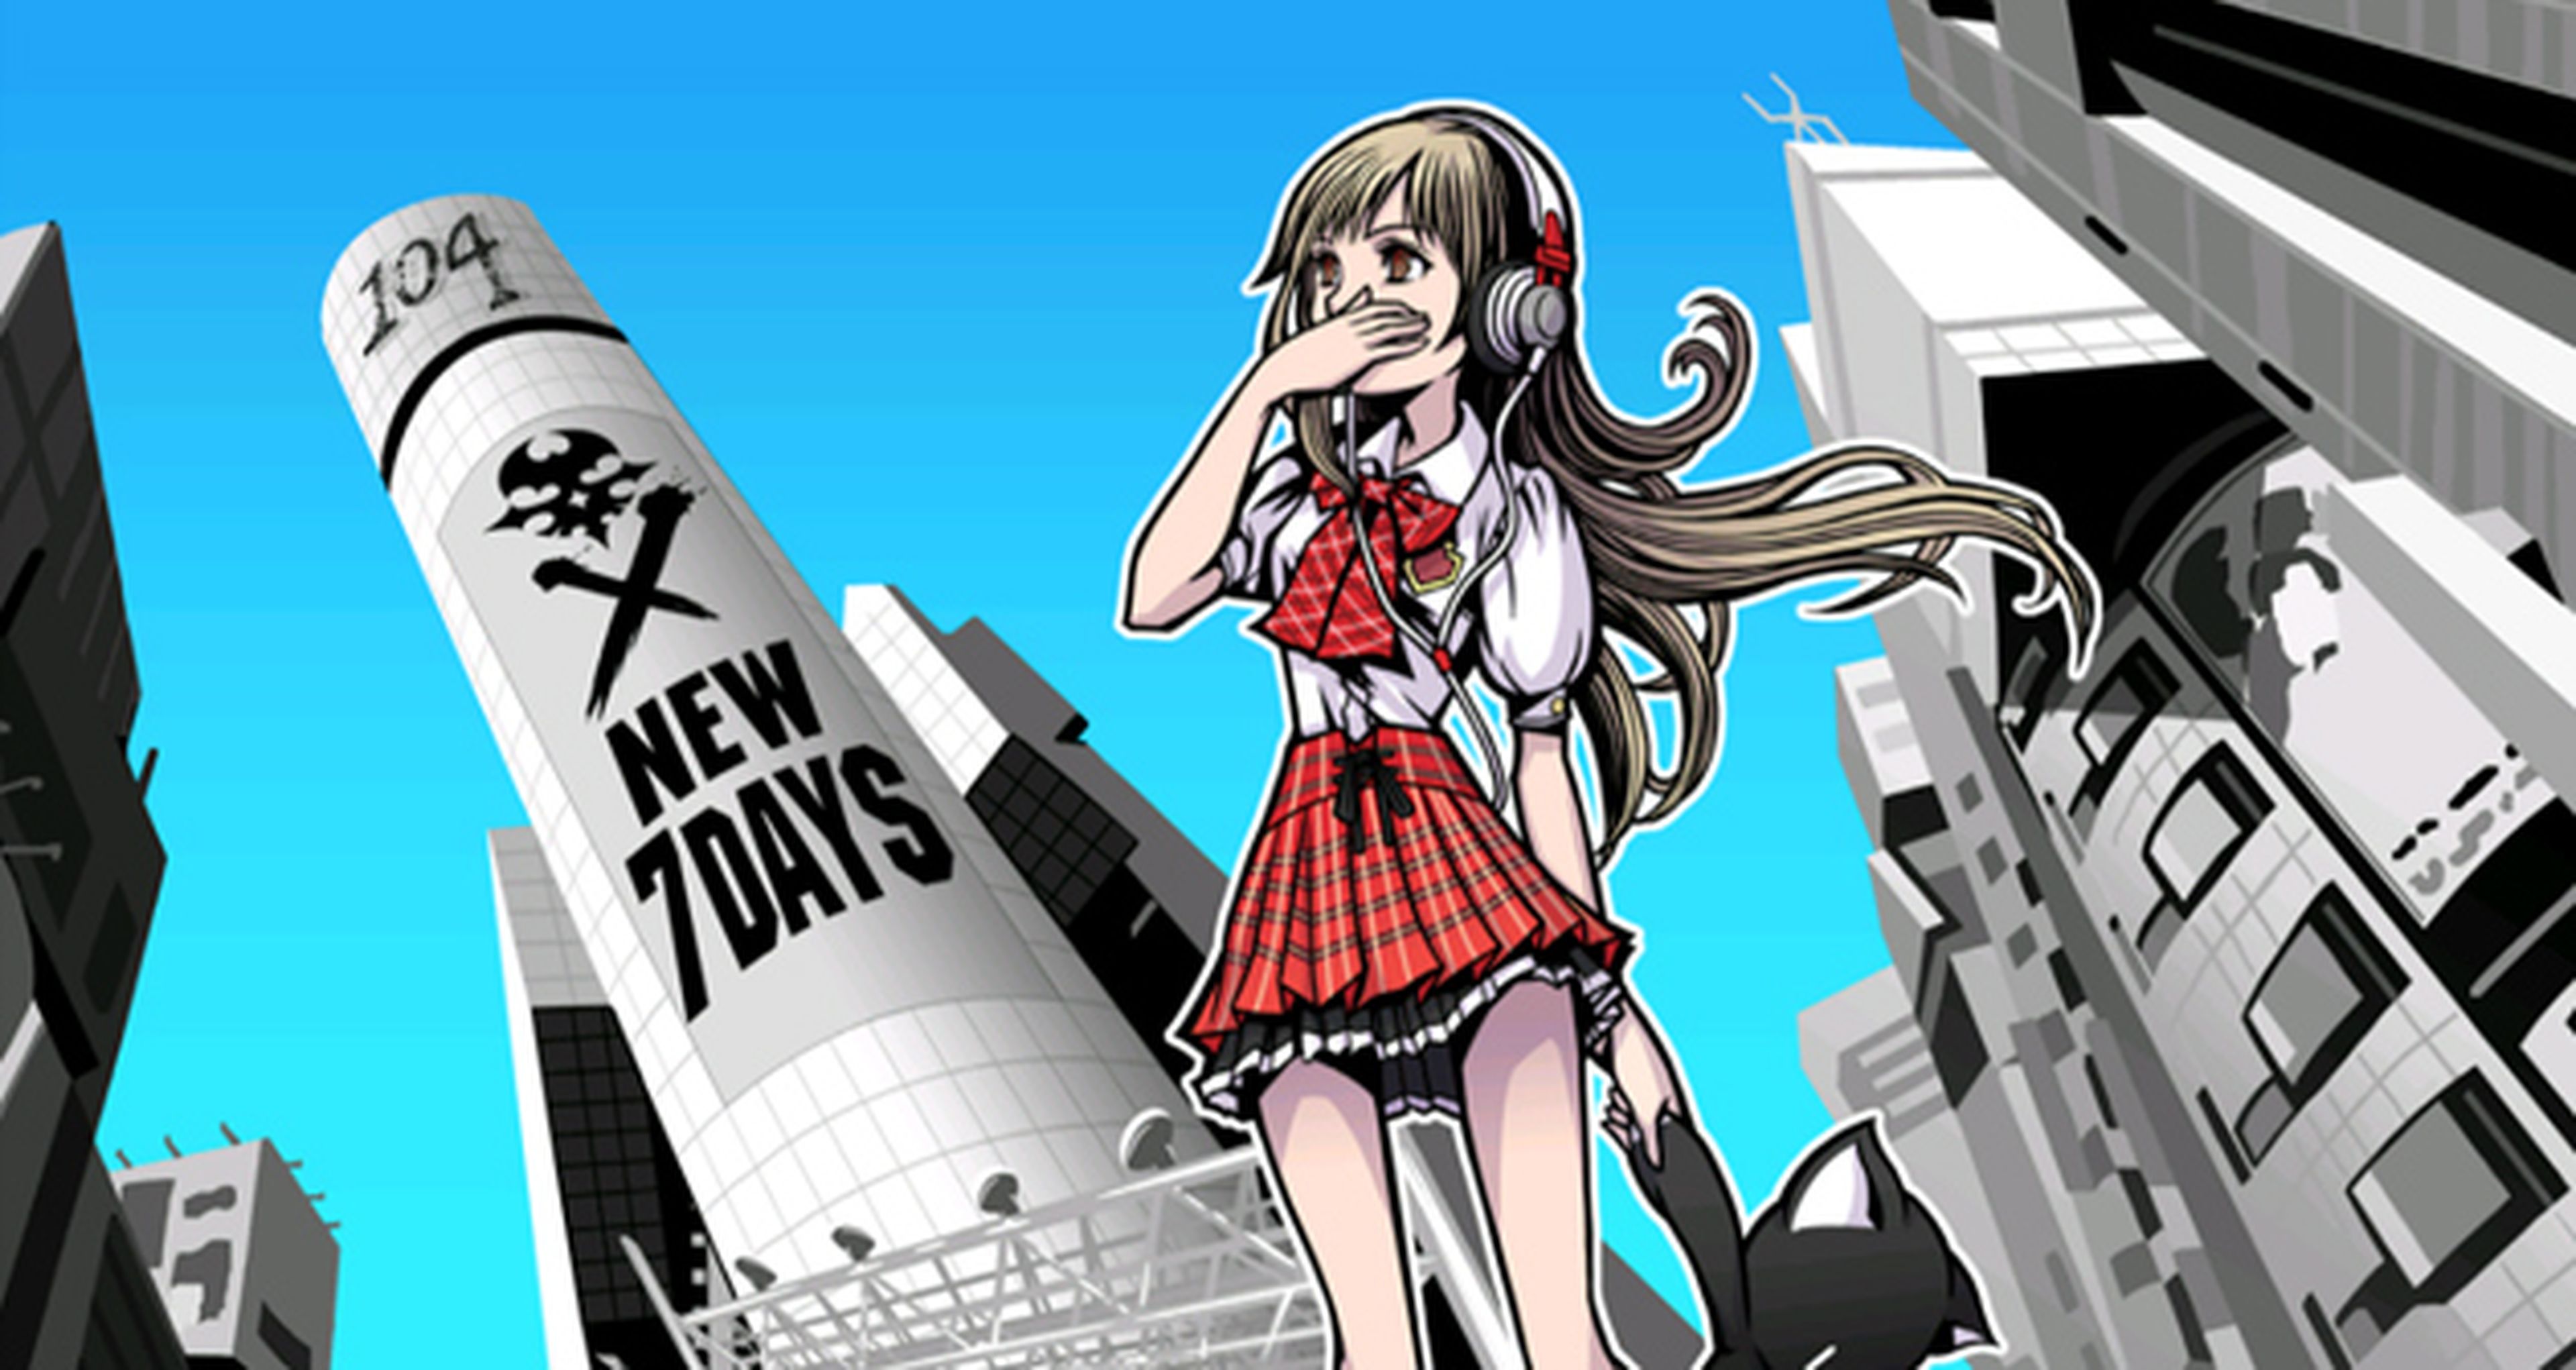 ¿Habrá nuevo The World Ends With You?